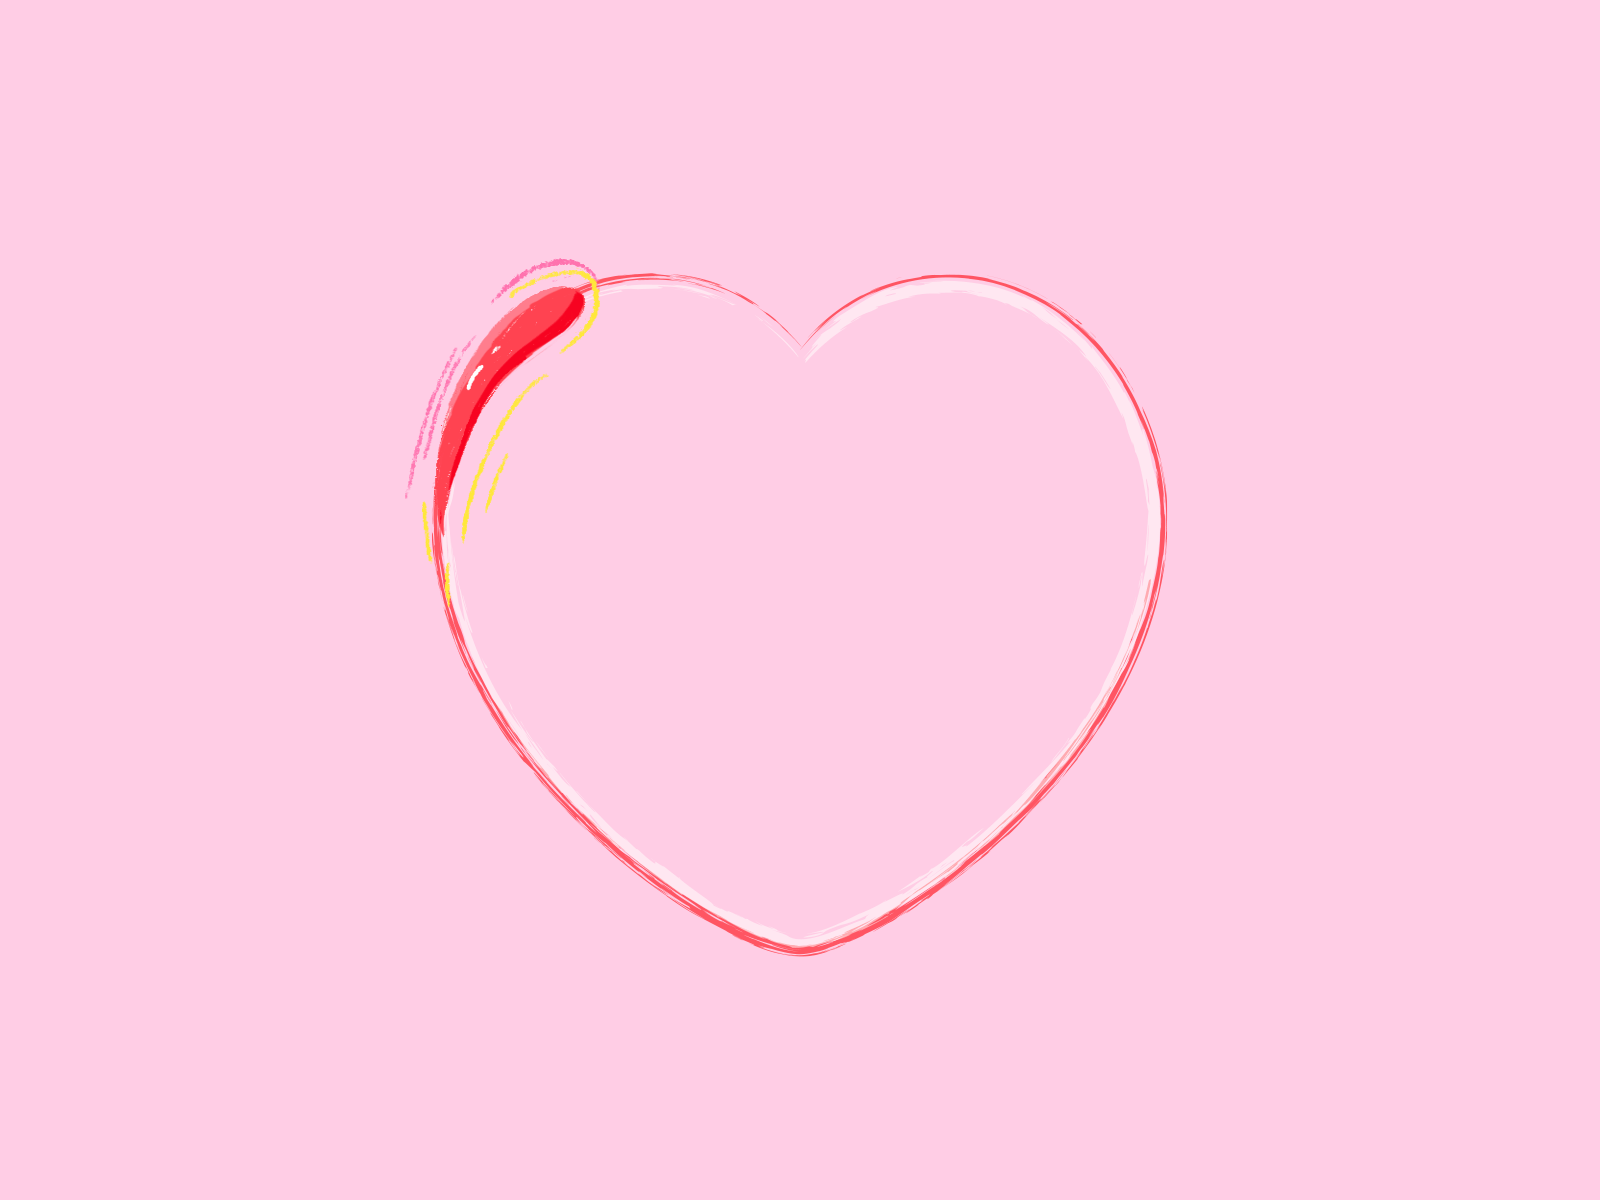 Infinity Love 🥰 animation color frame by frame heart love pink